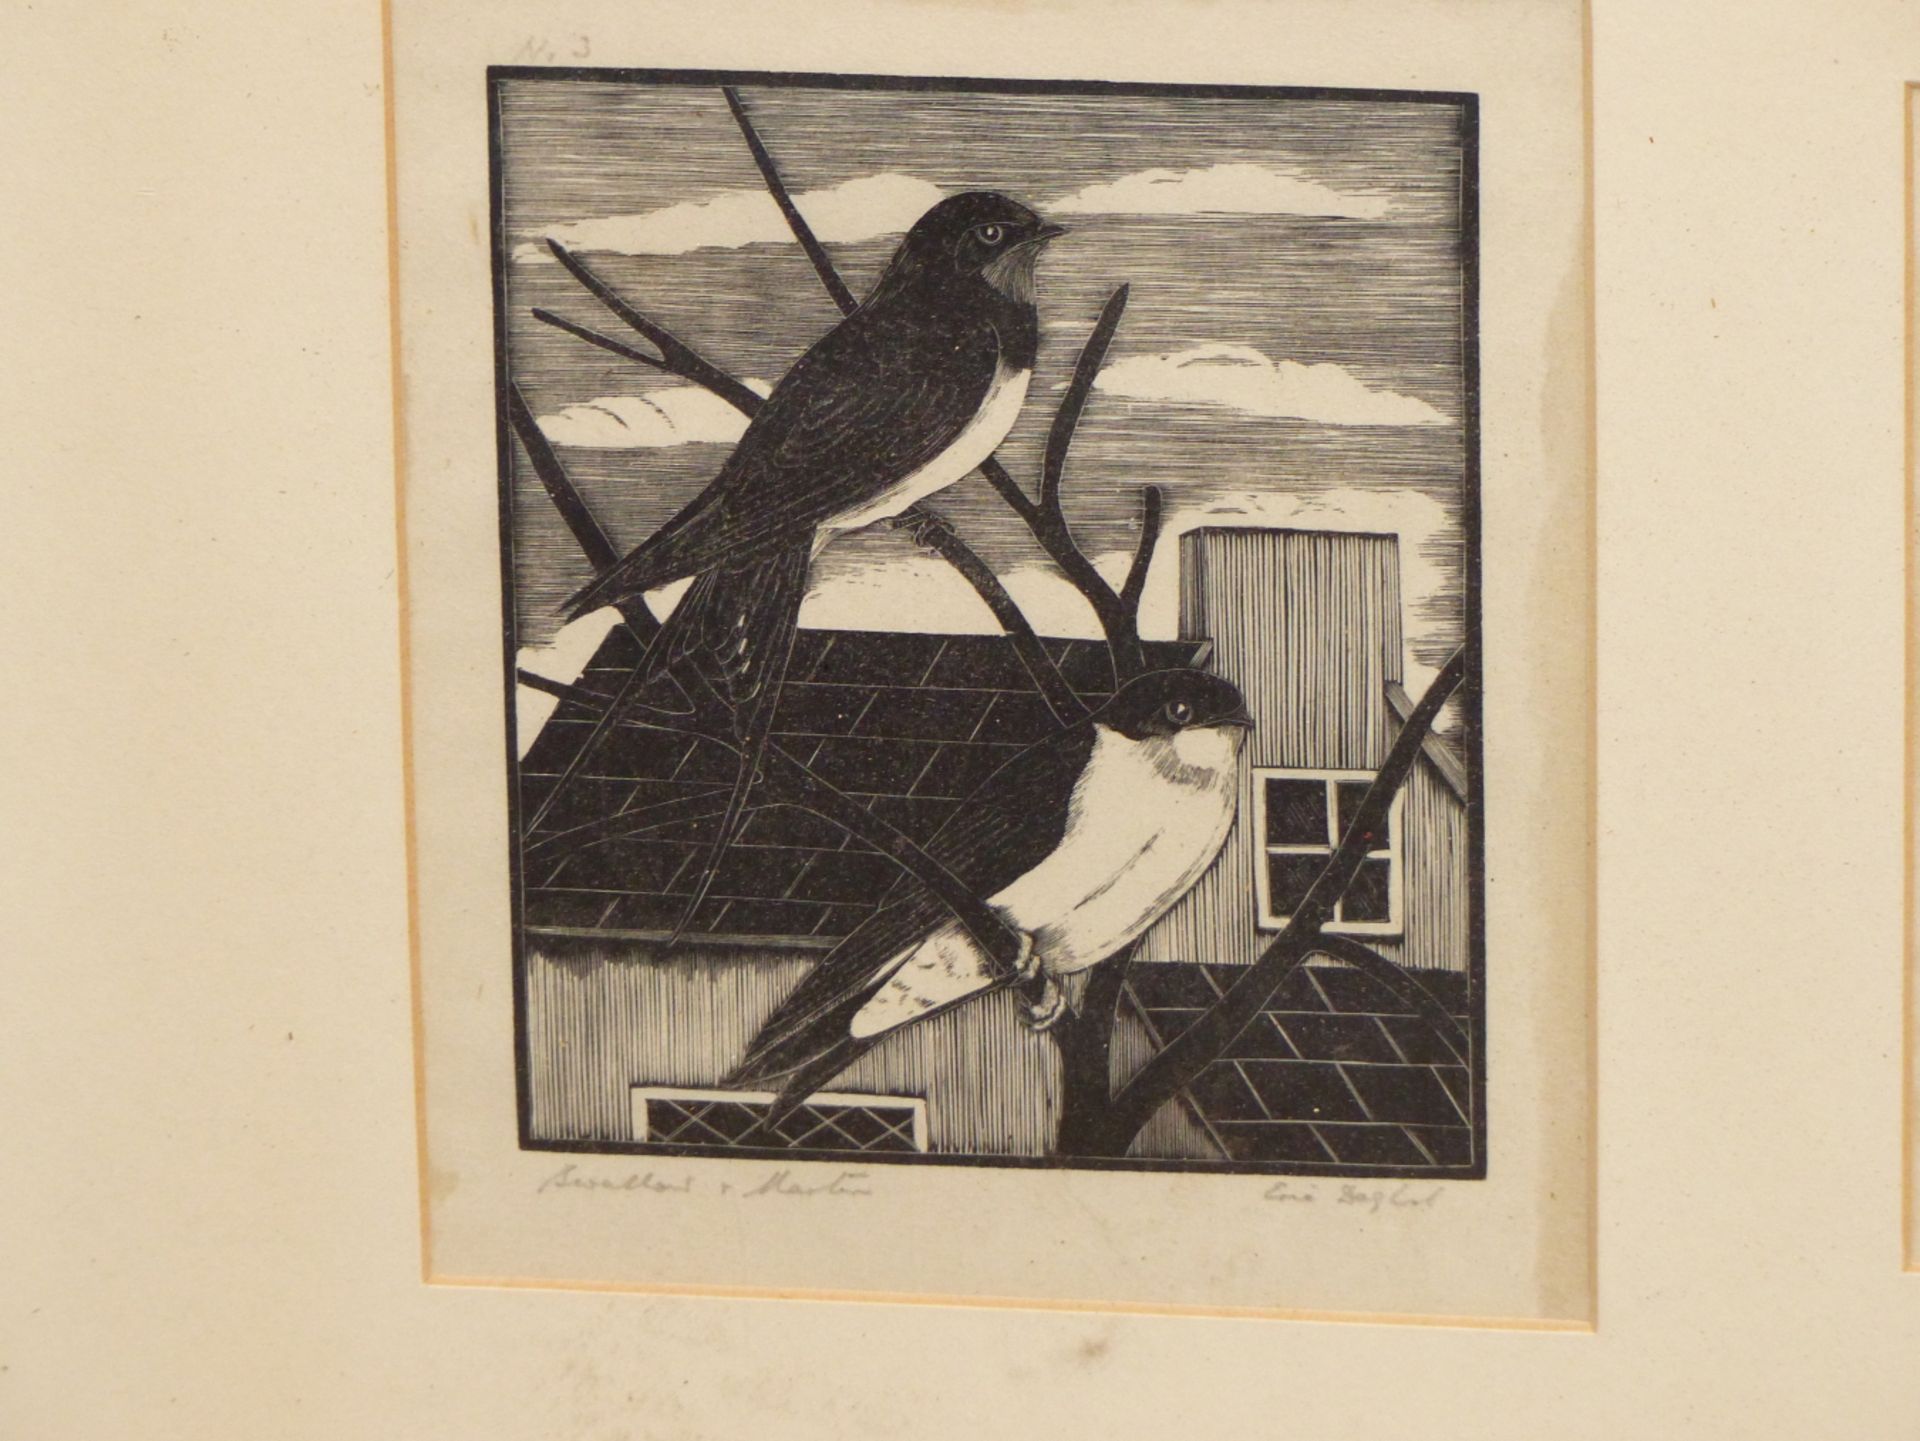 ERIC FITCH DAGLISH (1894-1964), A SET OF SIX BOOK ILLUSTRATIONS, "SWALLOW & MARTIN", "TEAL", SEDGE - Image 2 of 8